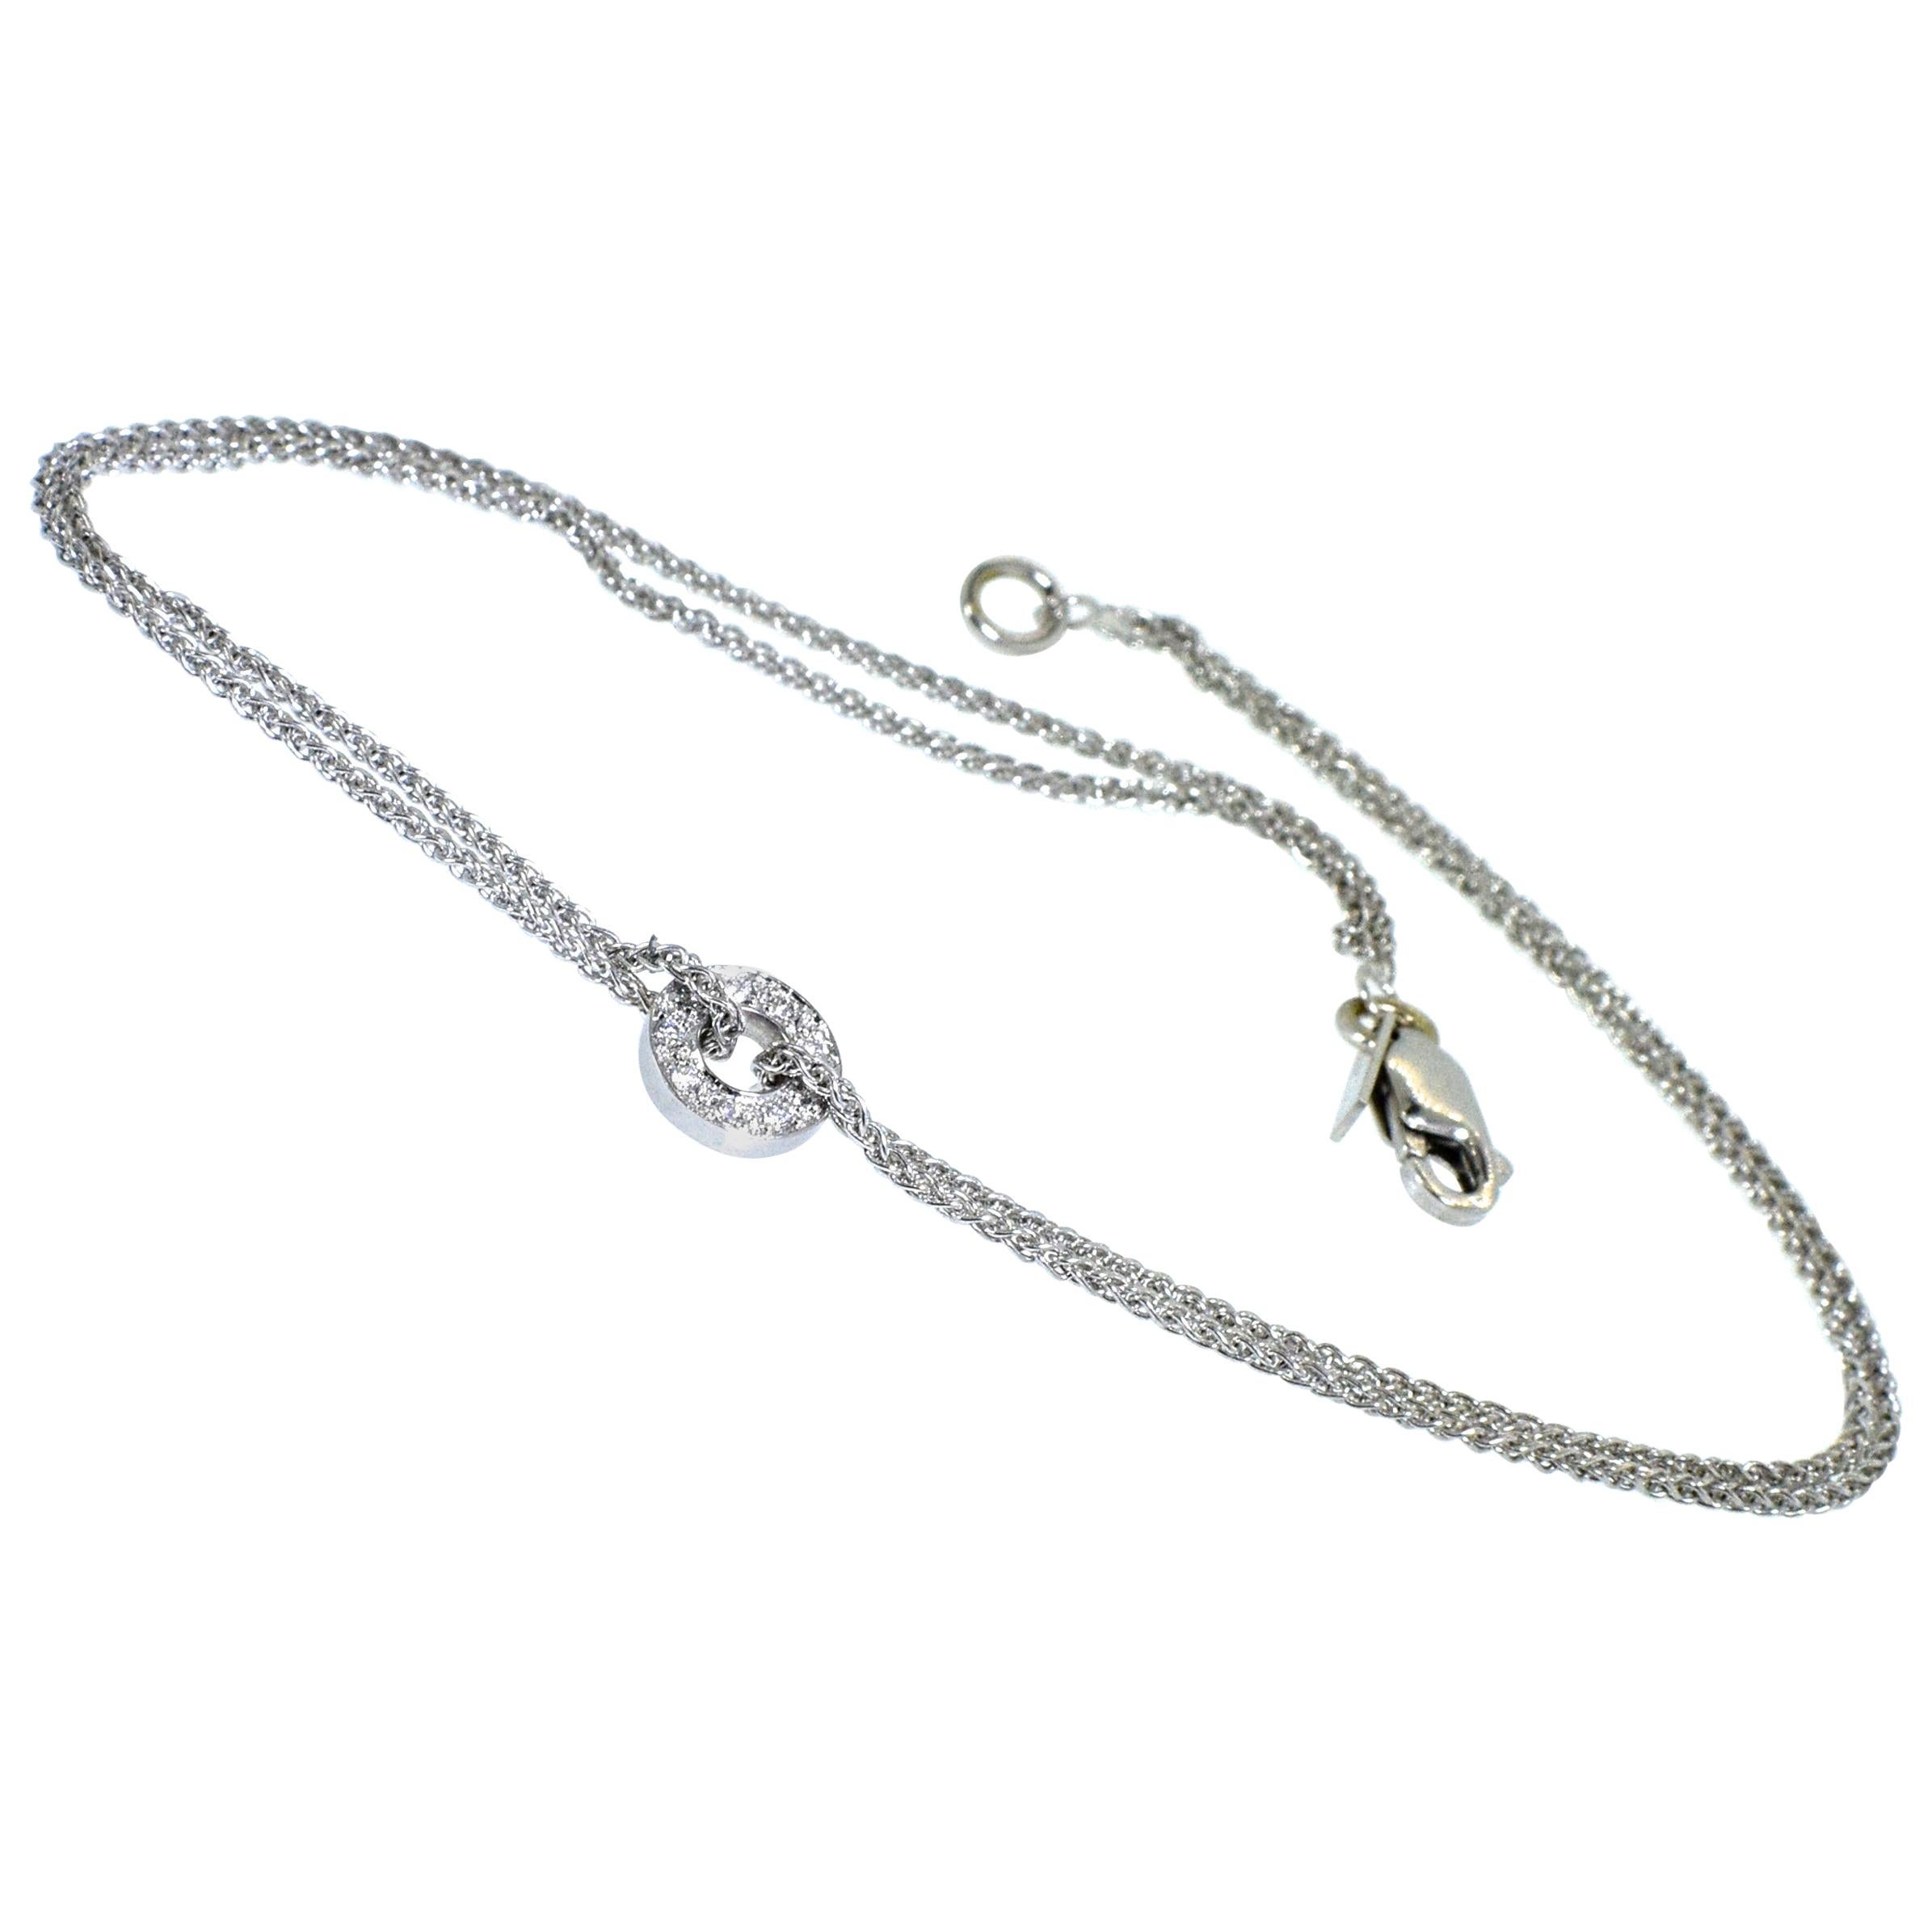 White Gold and Diamond Anklet